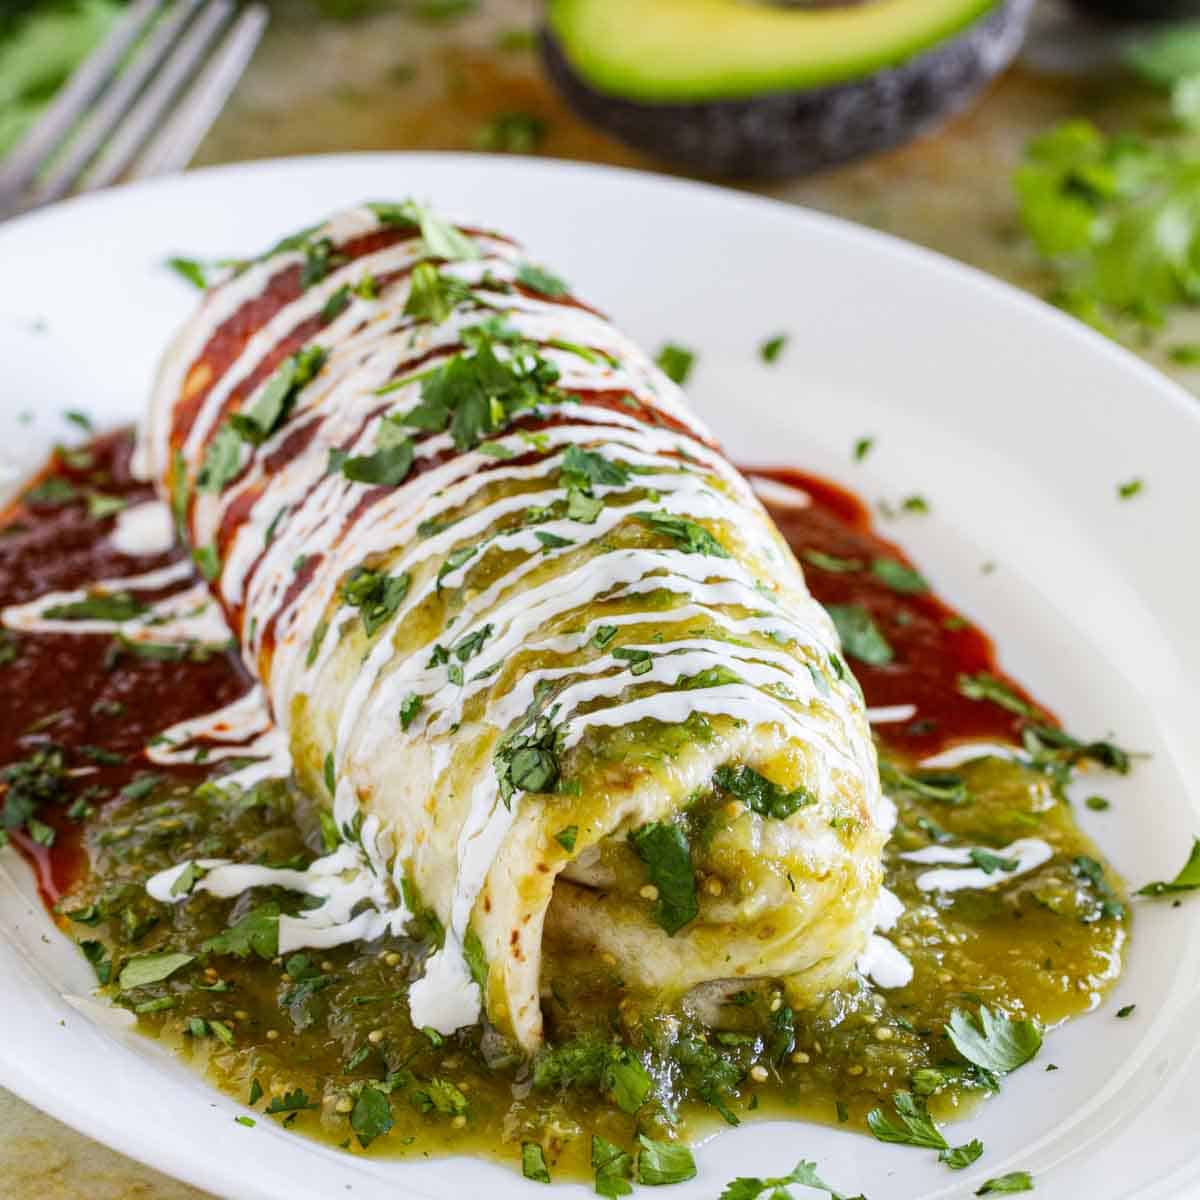 Burrito Recipe with Chicken smothered with red and green sauces.